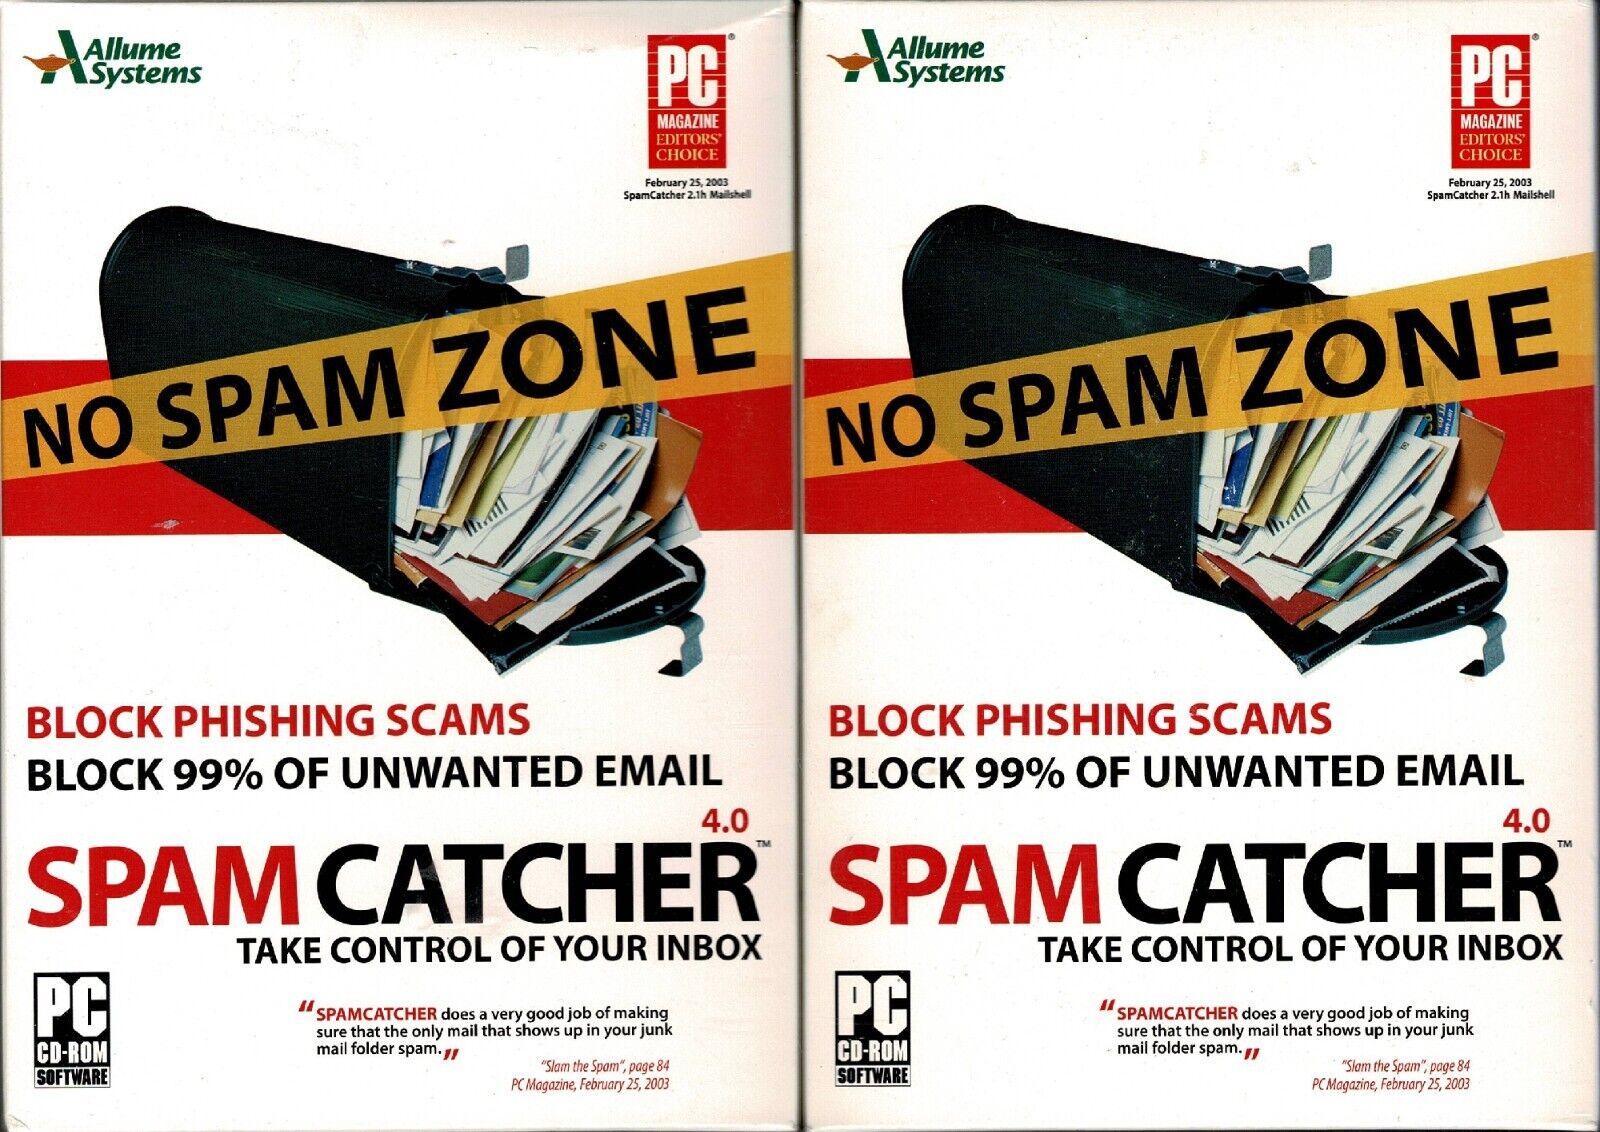 Lot of 2 Allume Spam Catcher 4.0 Pc New Sealed Box XP Block Email & Phishing